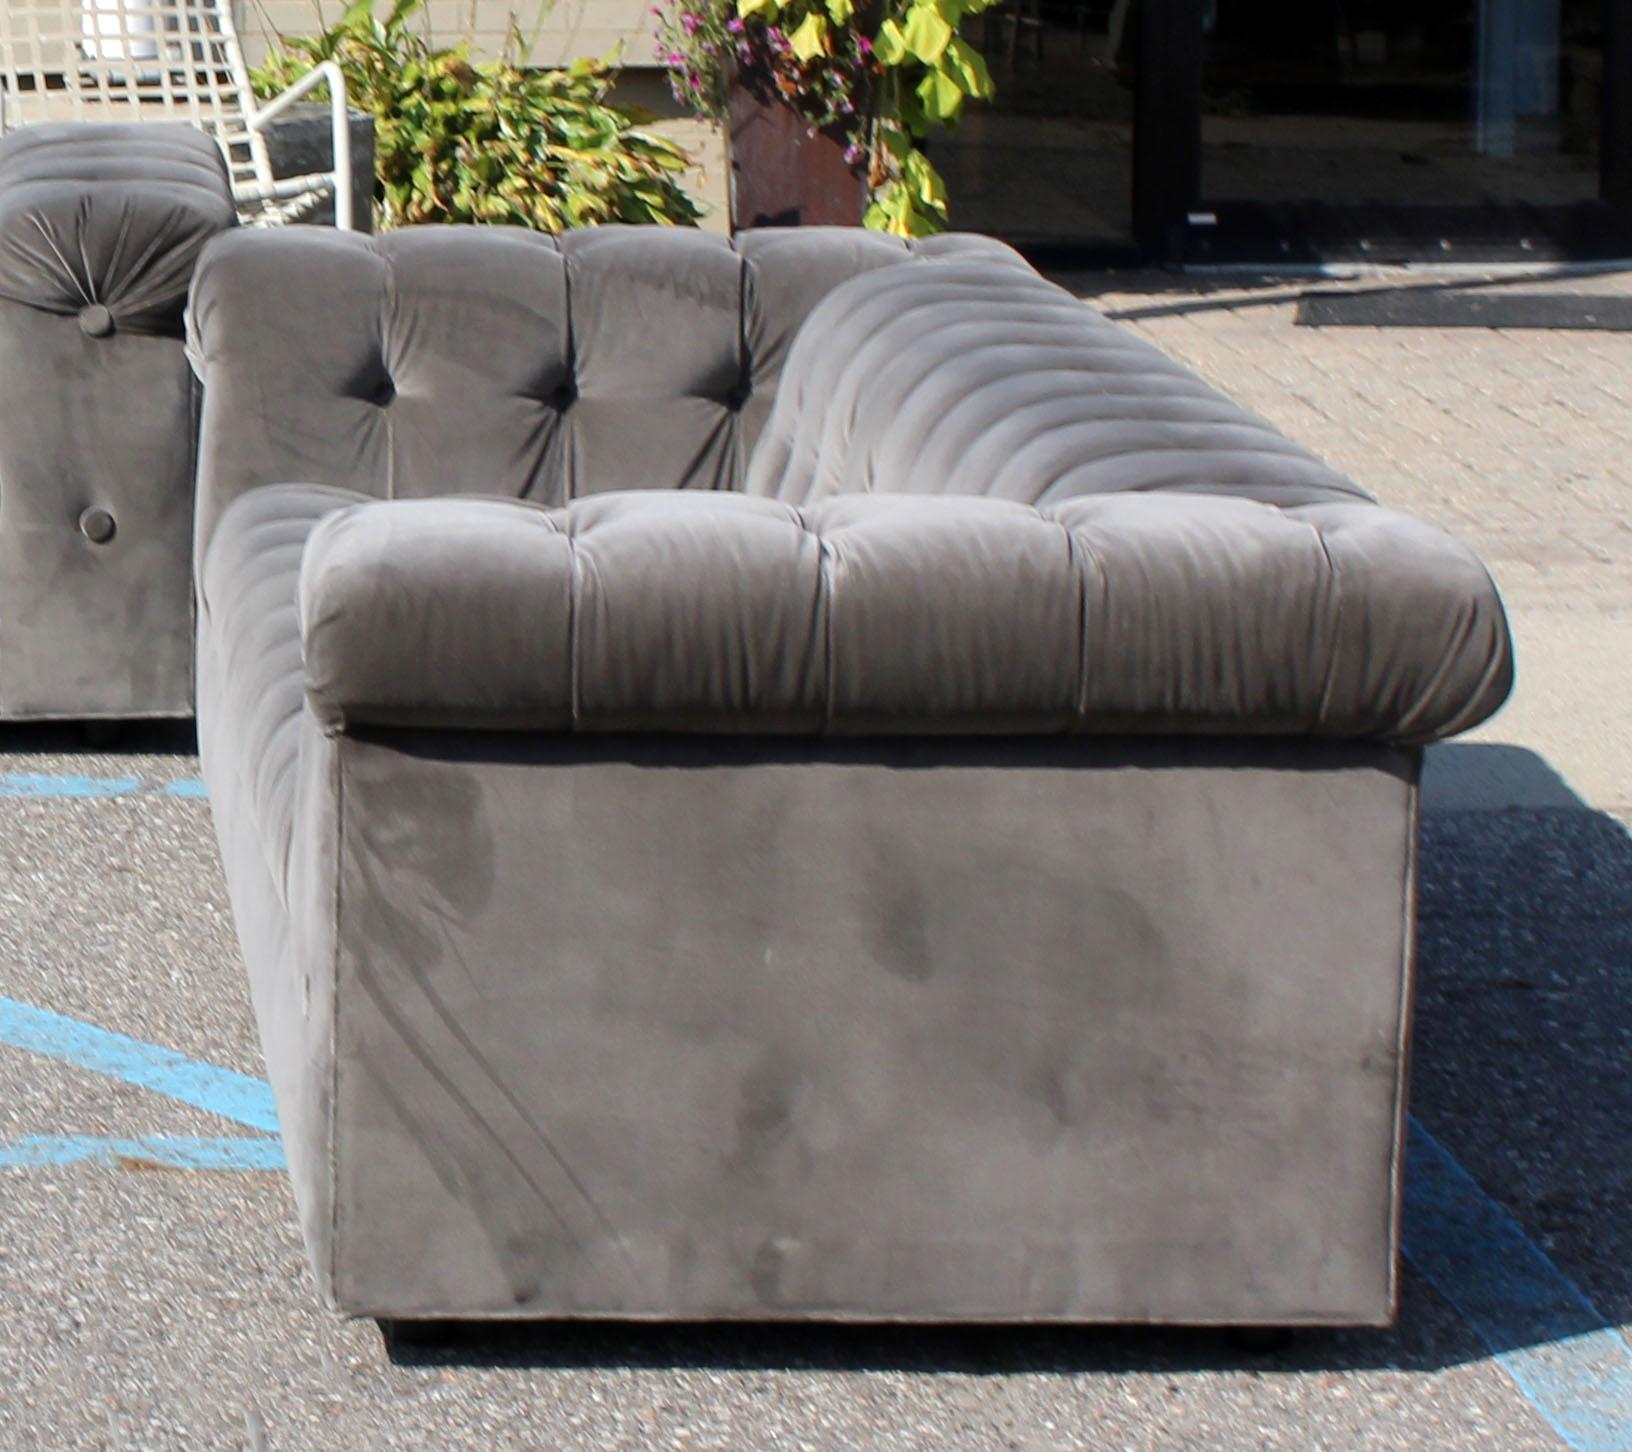 For your consideration is a fabulous x-long party sofa, with a tufted, gray velvet upholstery, by Dunbar. In excellent condition. The dimensions are 98